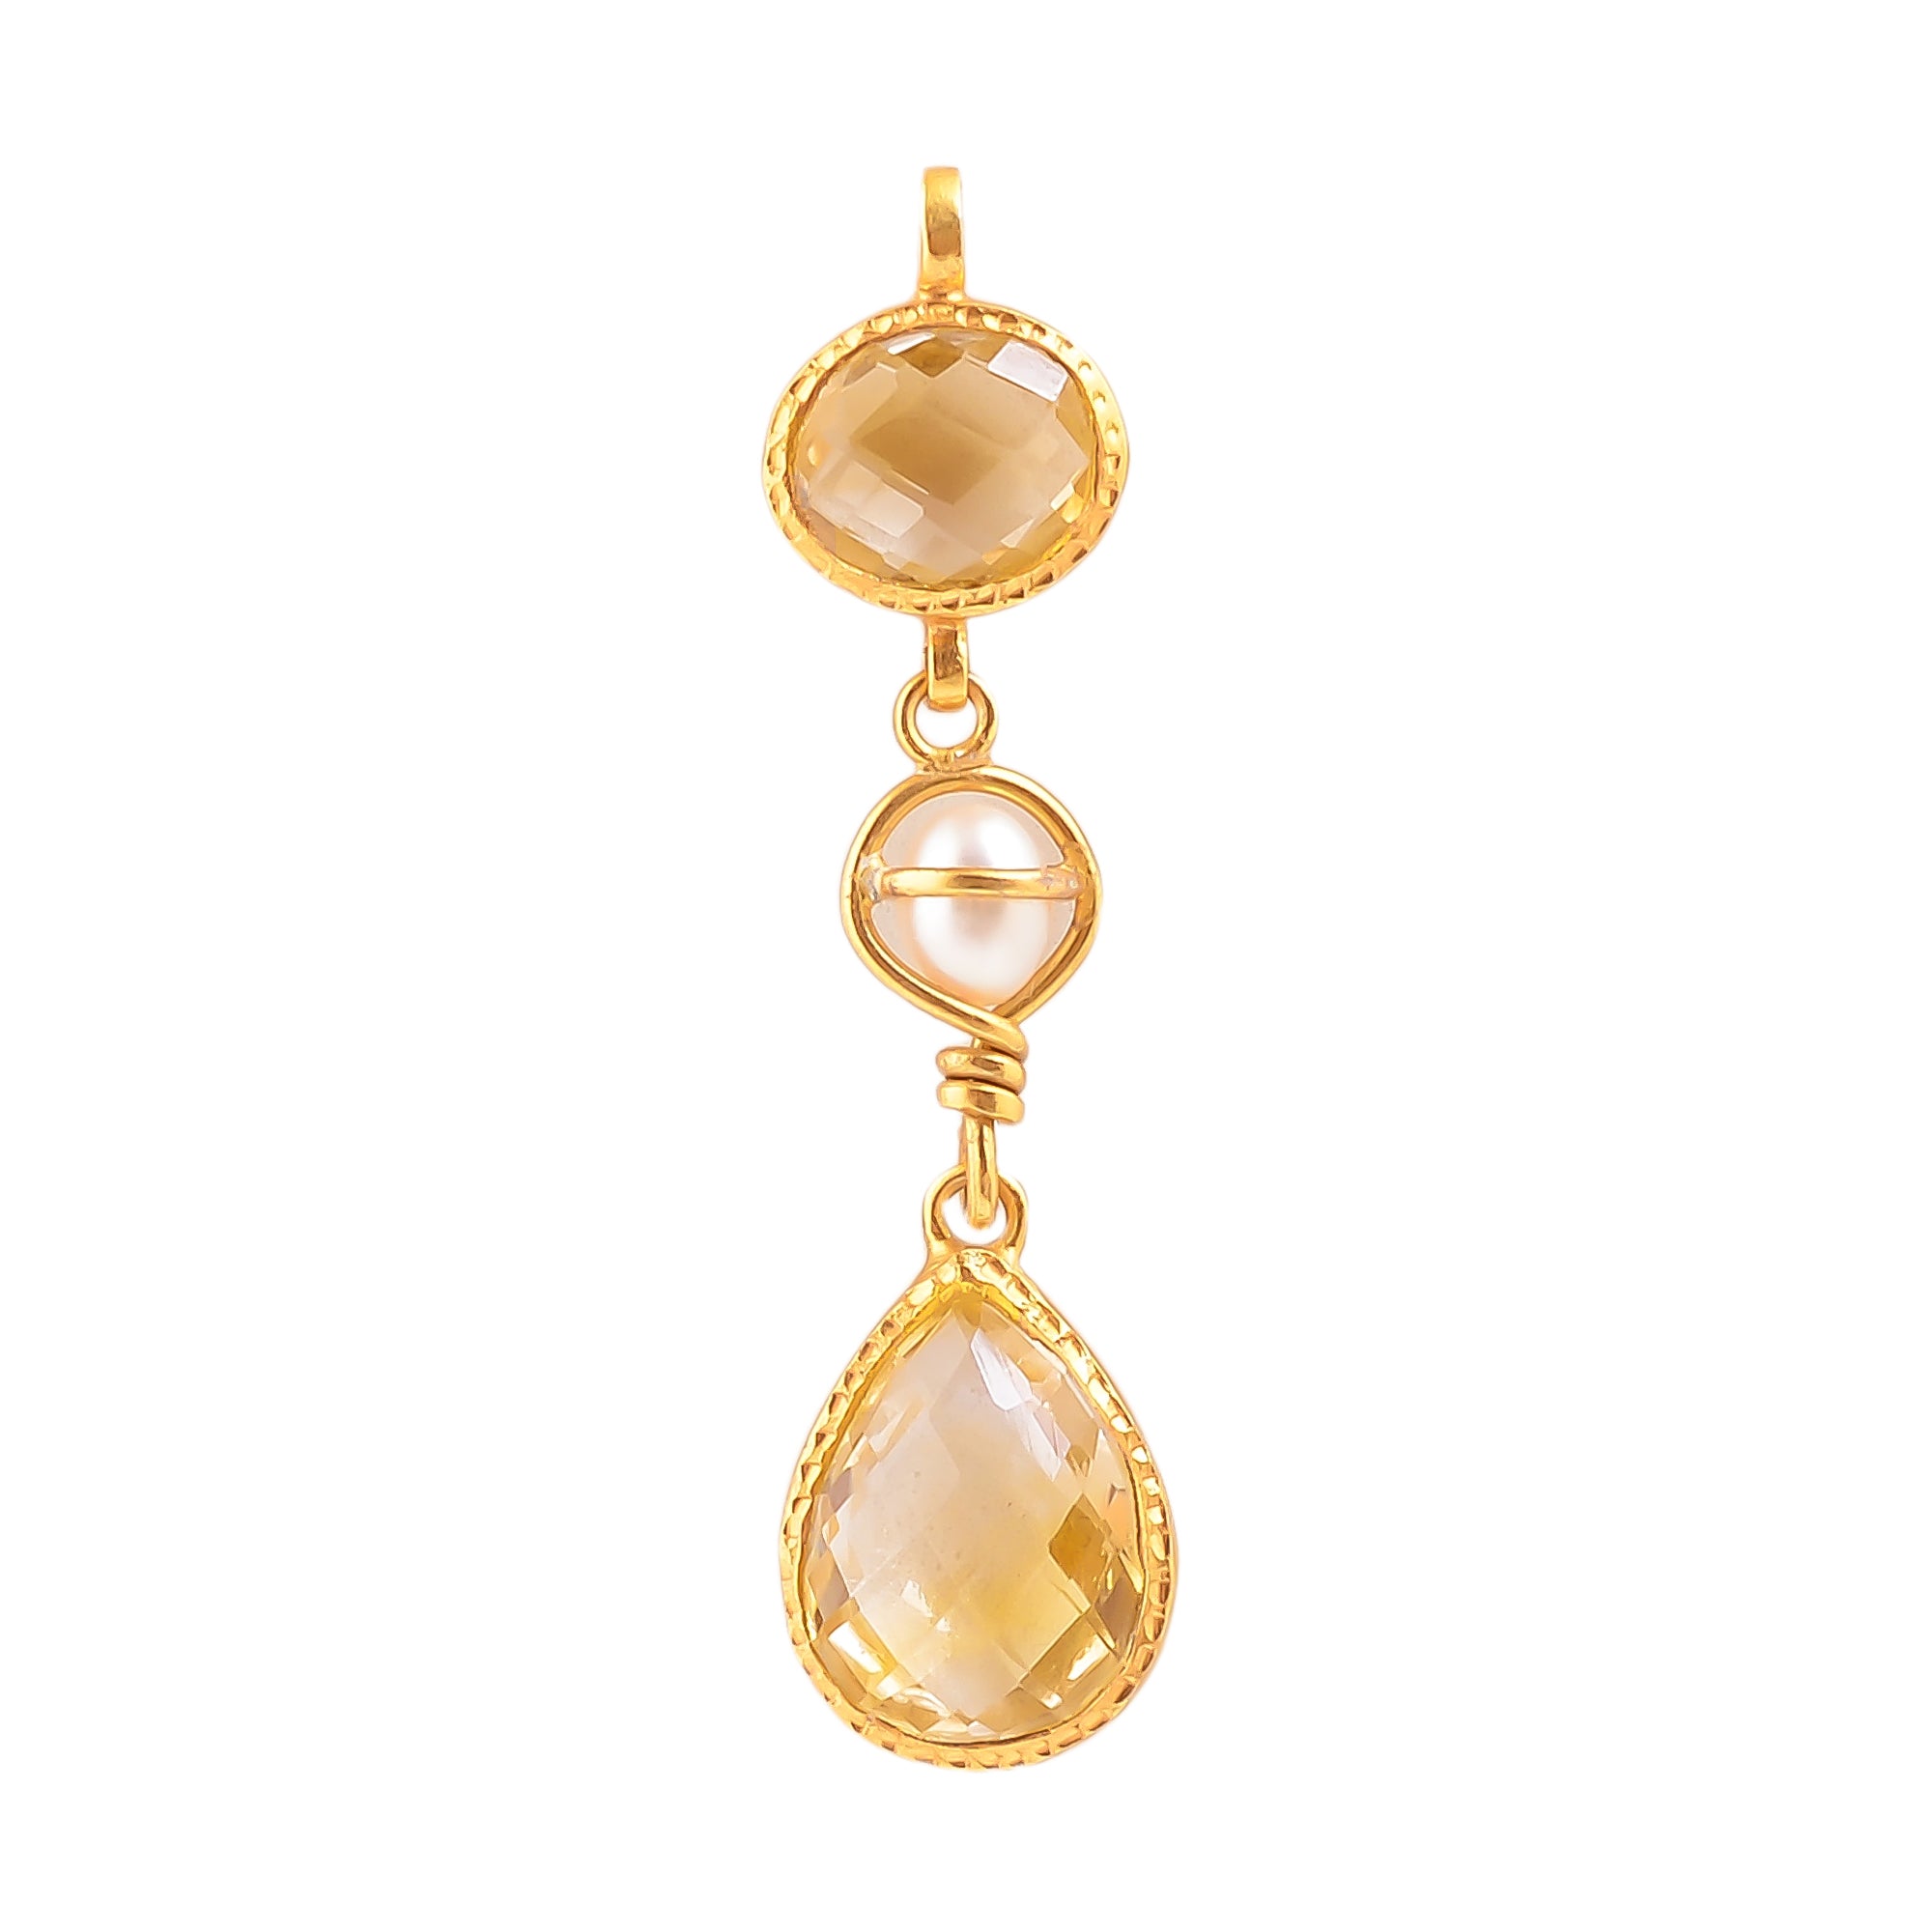 Buy Indian Handmade Silver Gold Plated Citrine/pearl Pendant